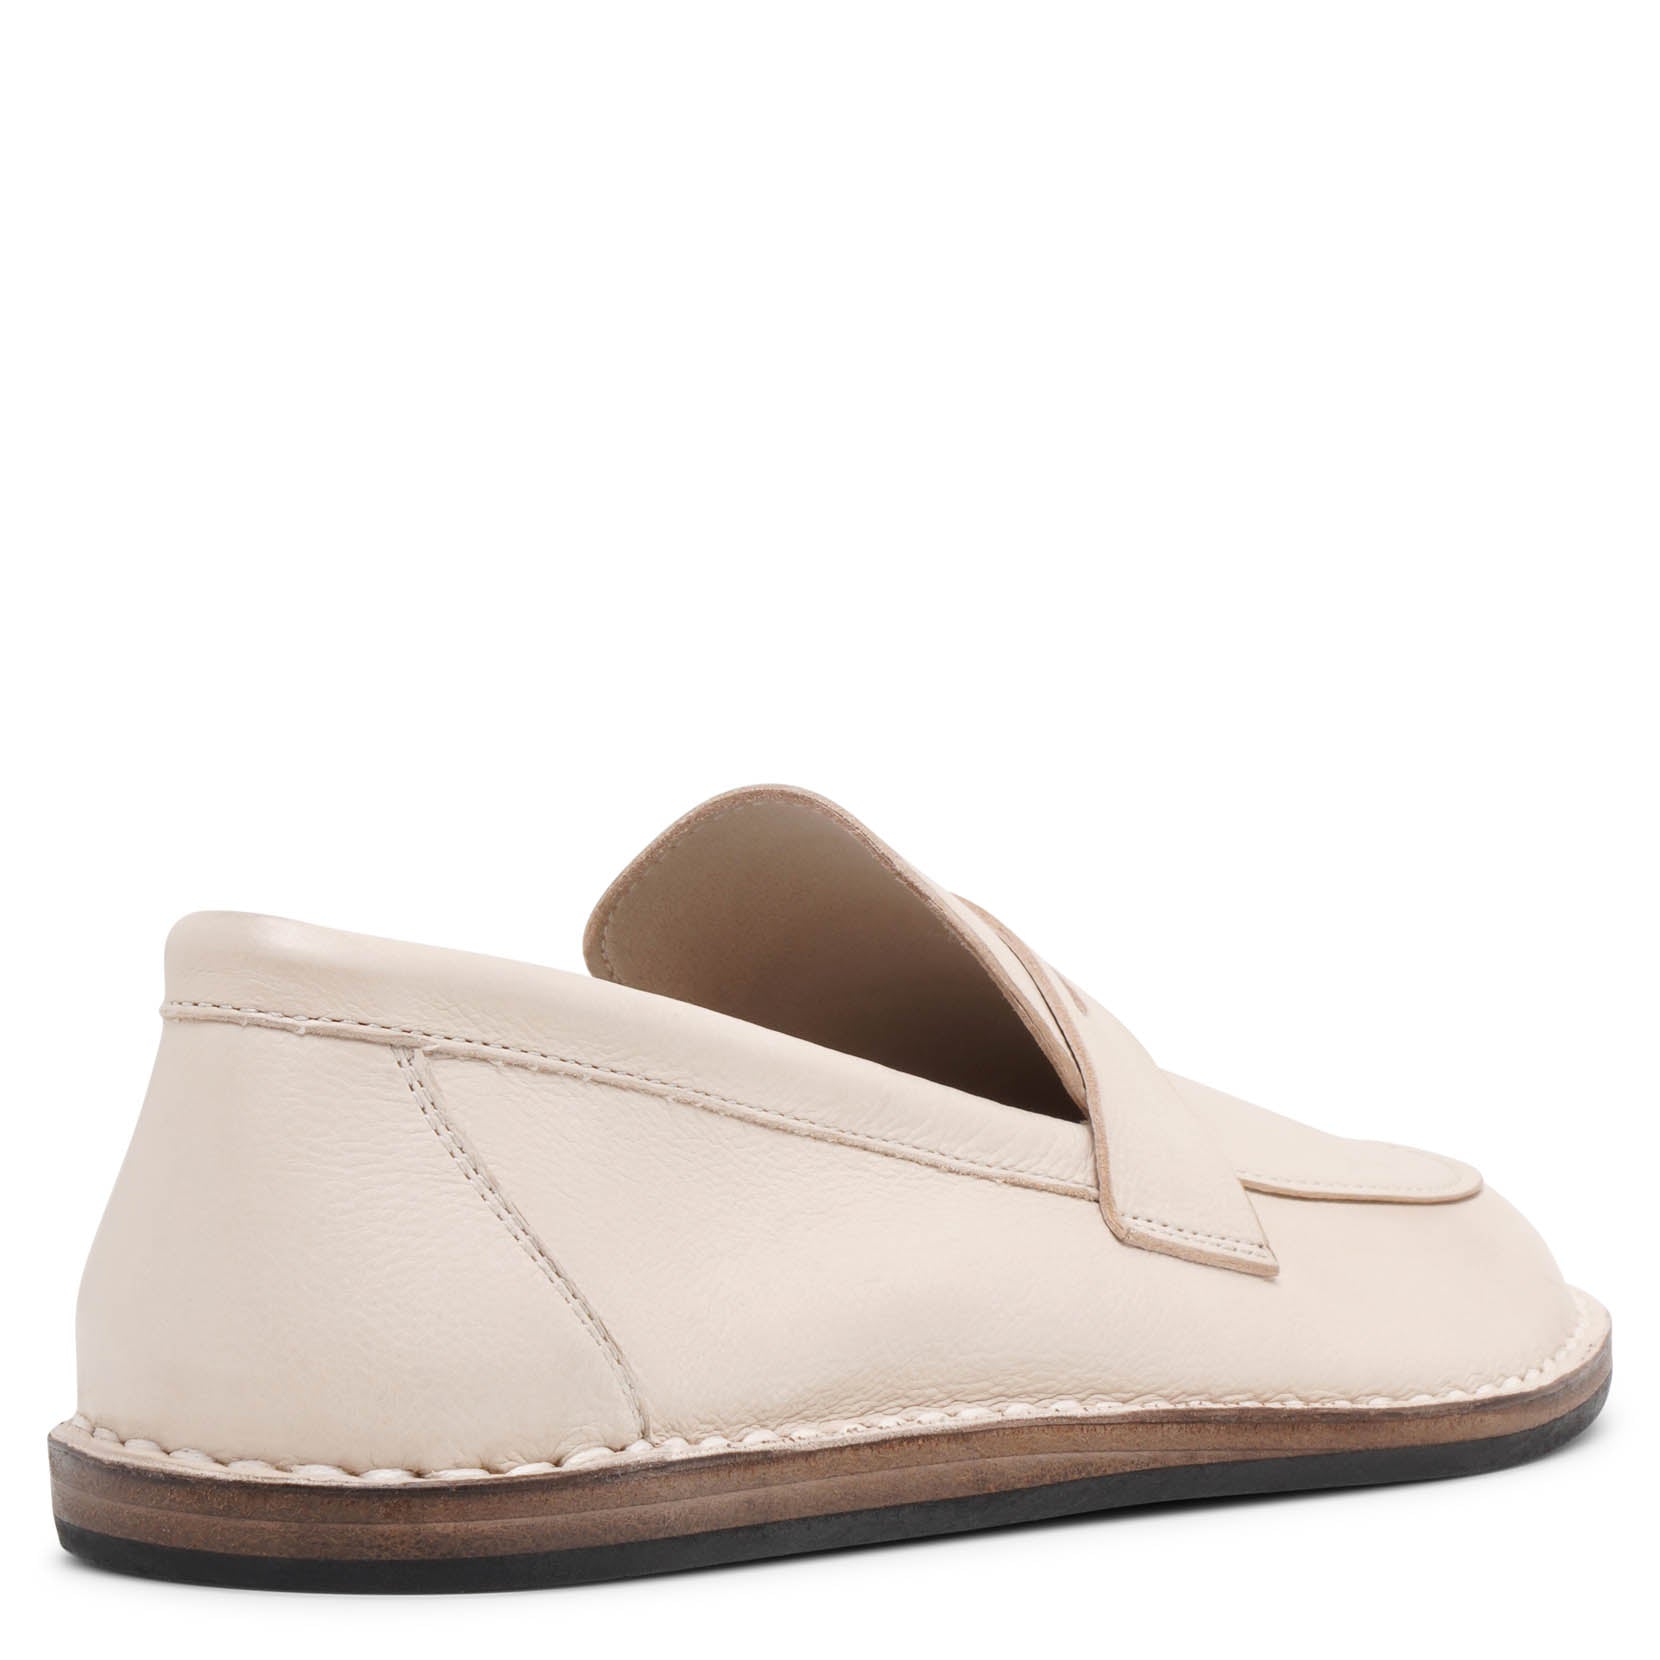 Cary taupe leather loafers